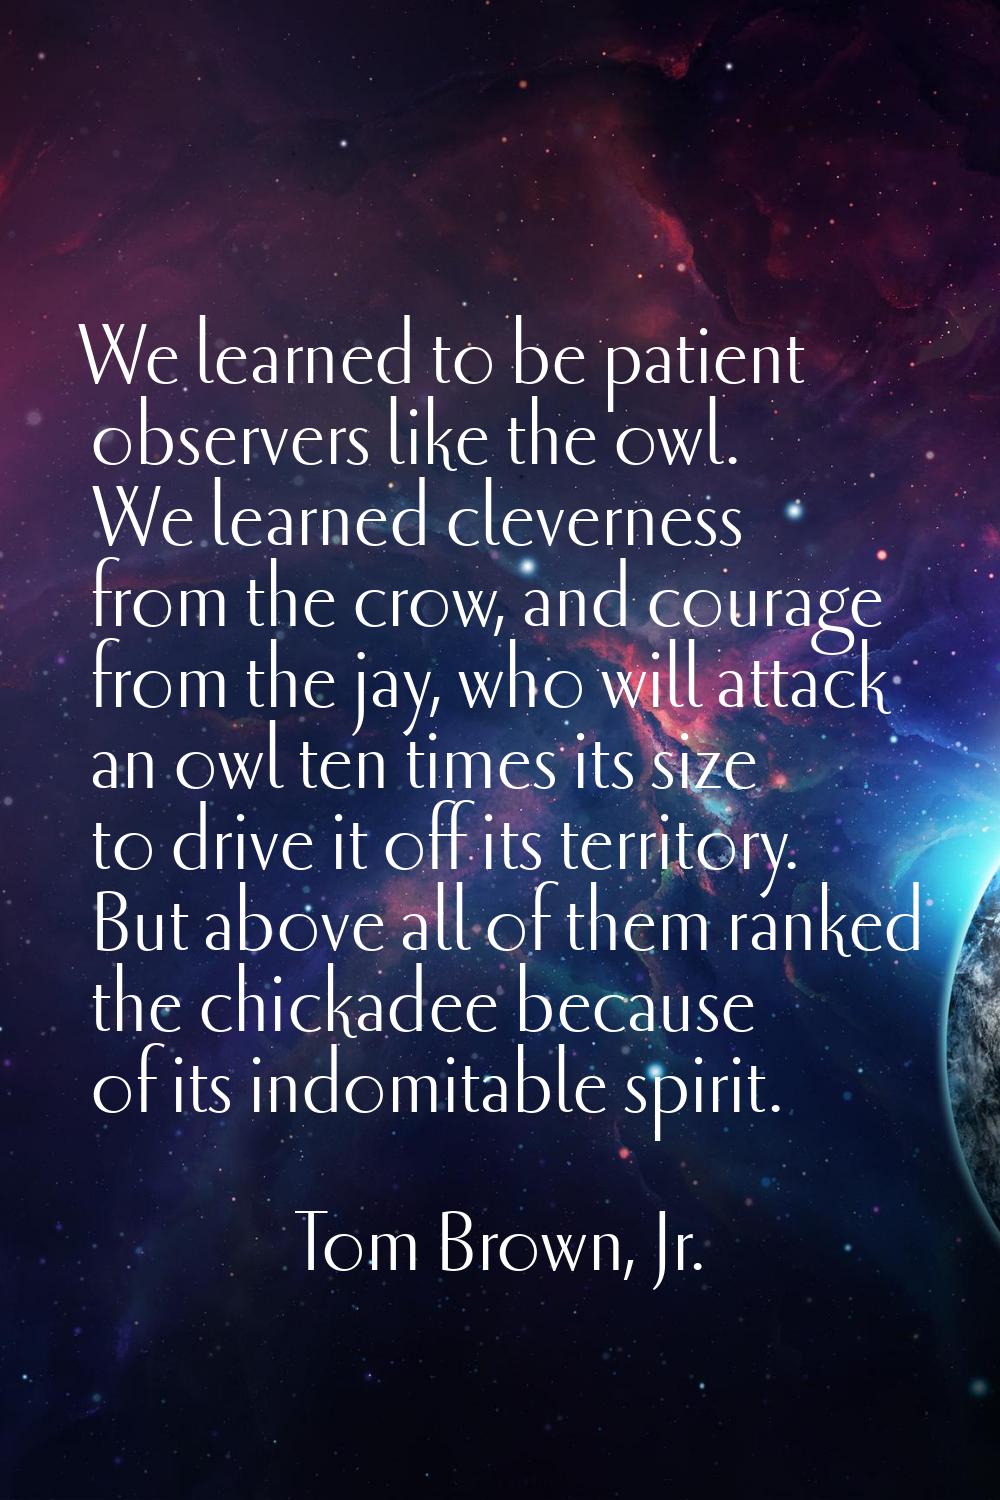 We learned to be patient observers like the owl. We learned cleverness from the crow, and courage f